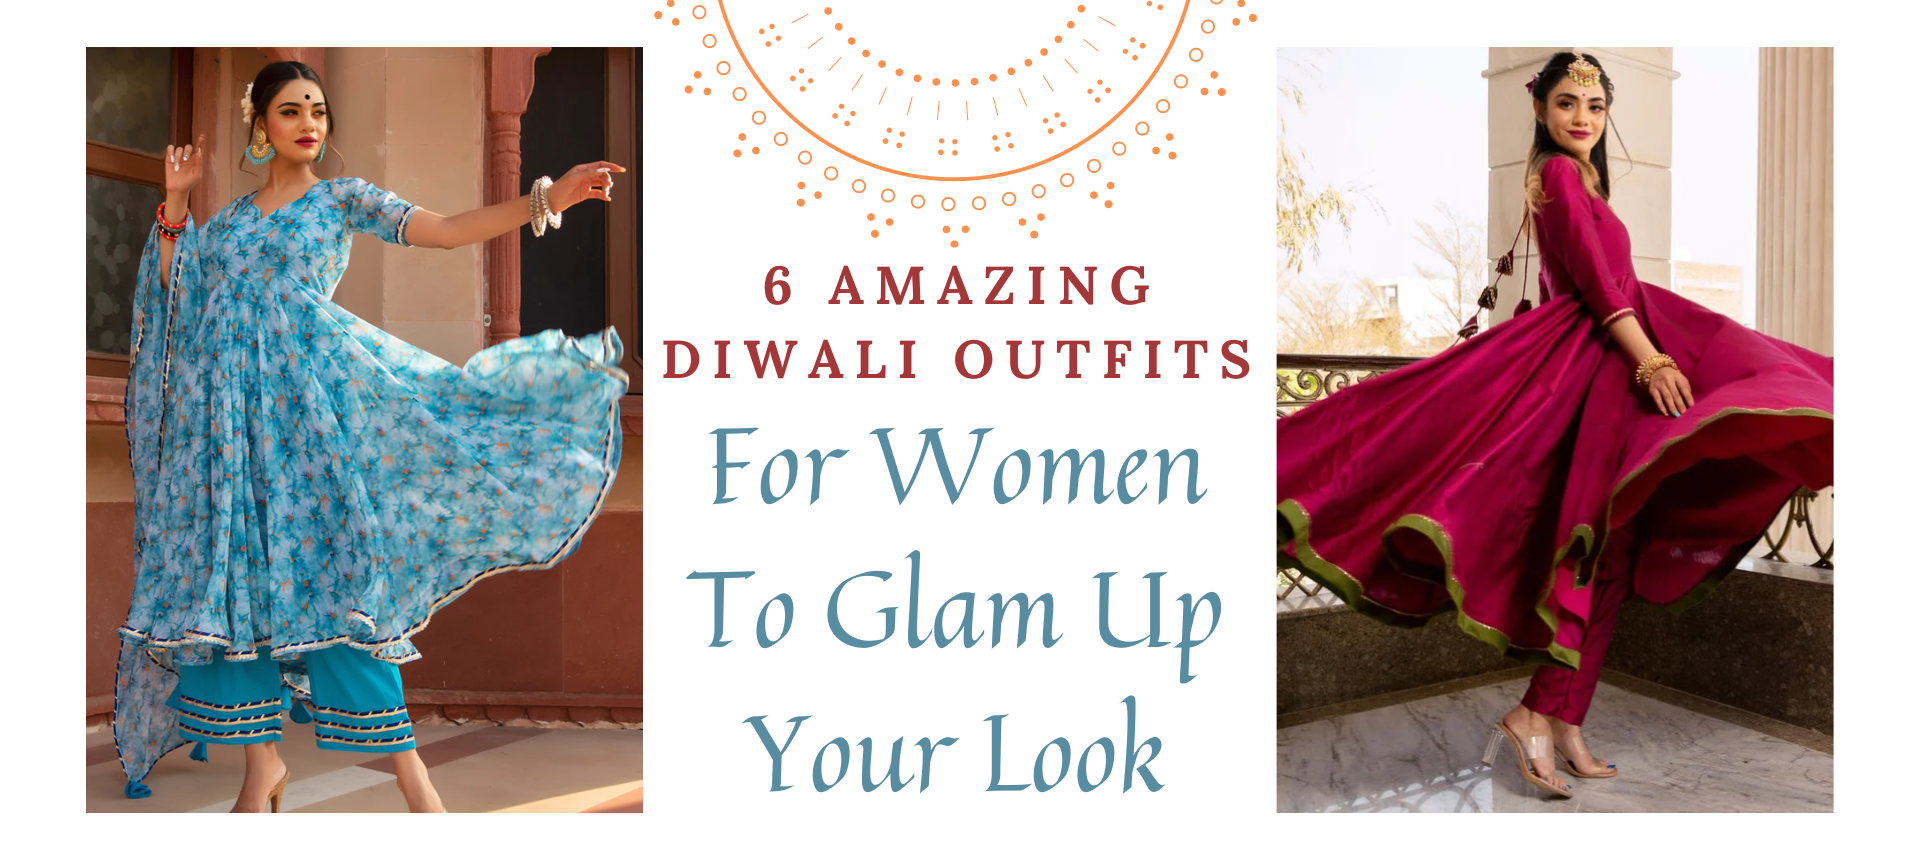 6 Amazing Diwali Outfits For Women To Glam Up Your Look – Pomcha Jaipur